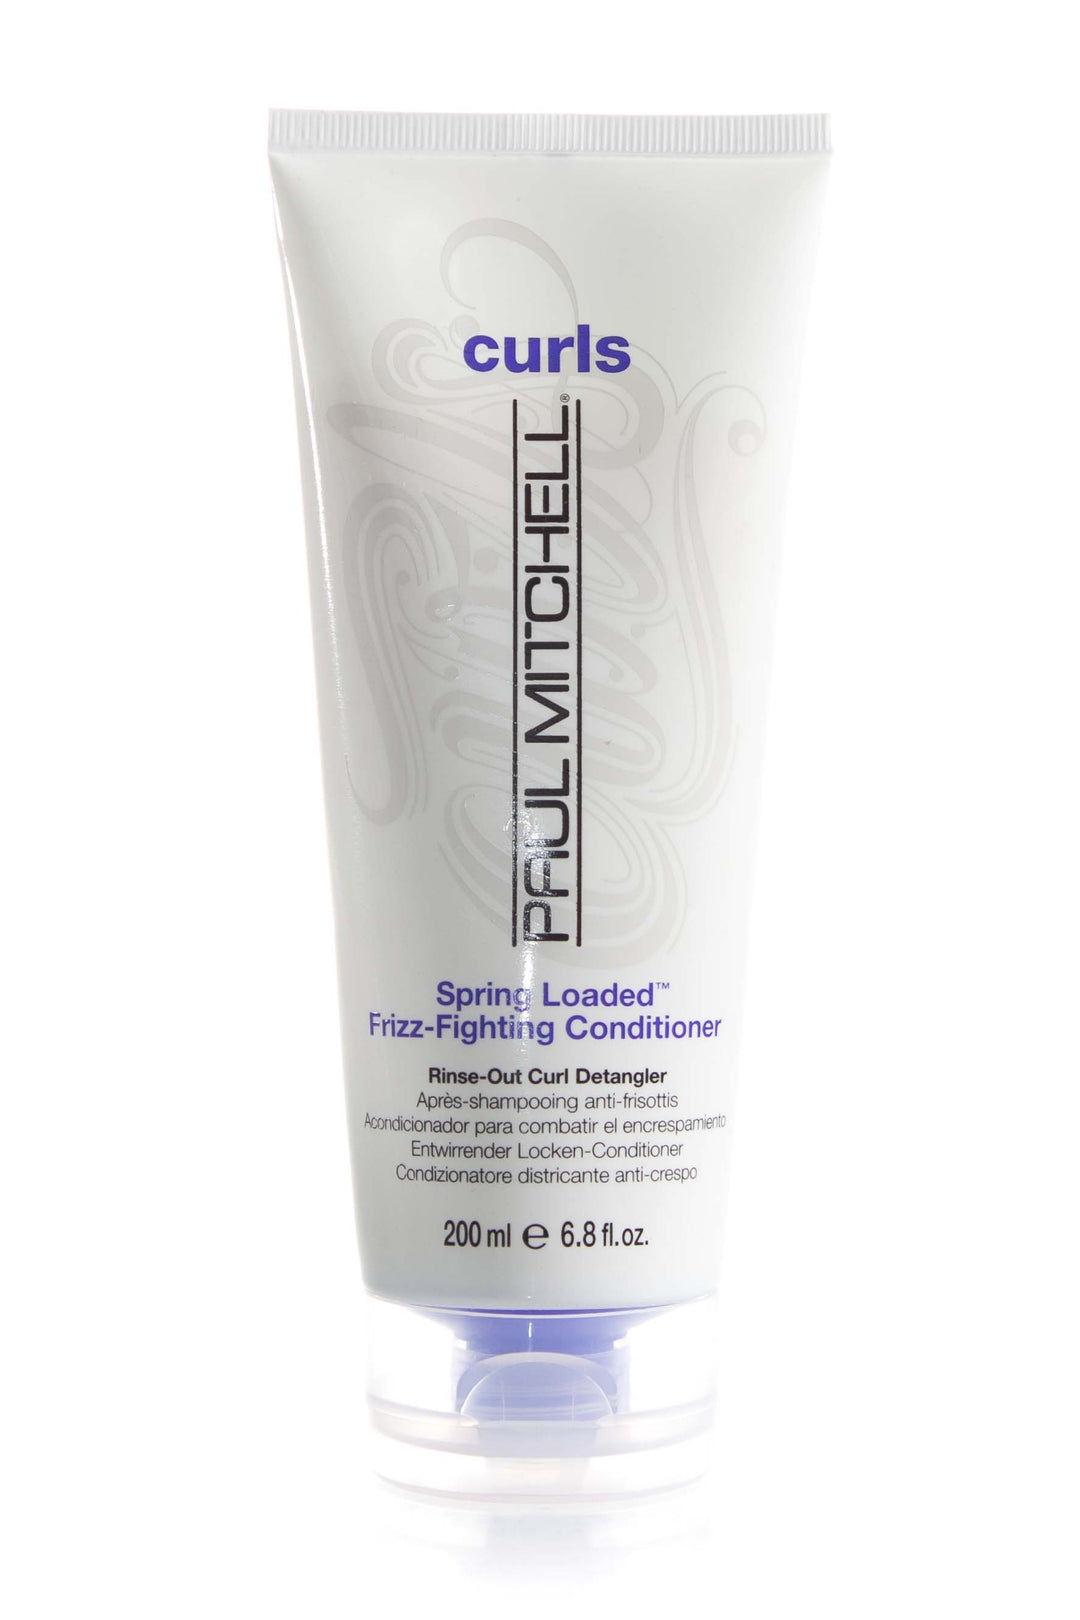 paul-mitchell-curls-spring-loaded-frizz-fighting-conditioner-200ml